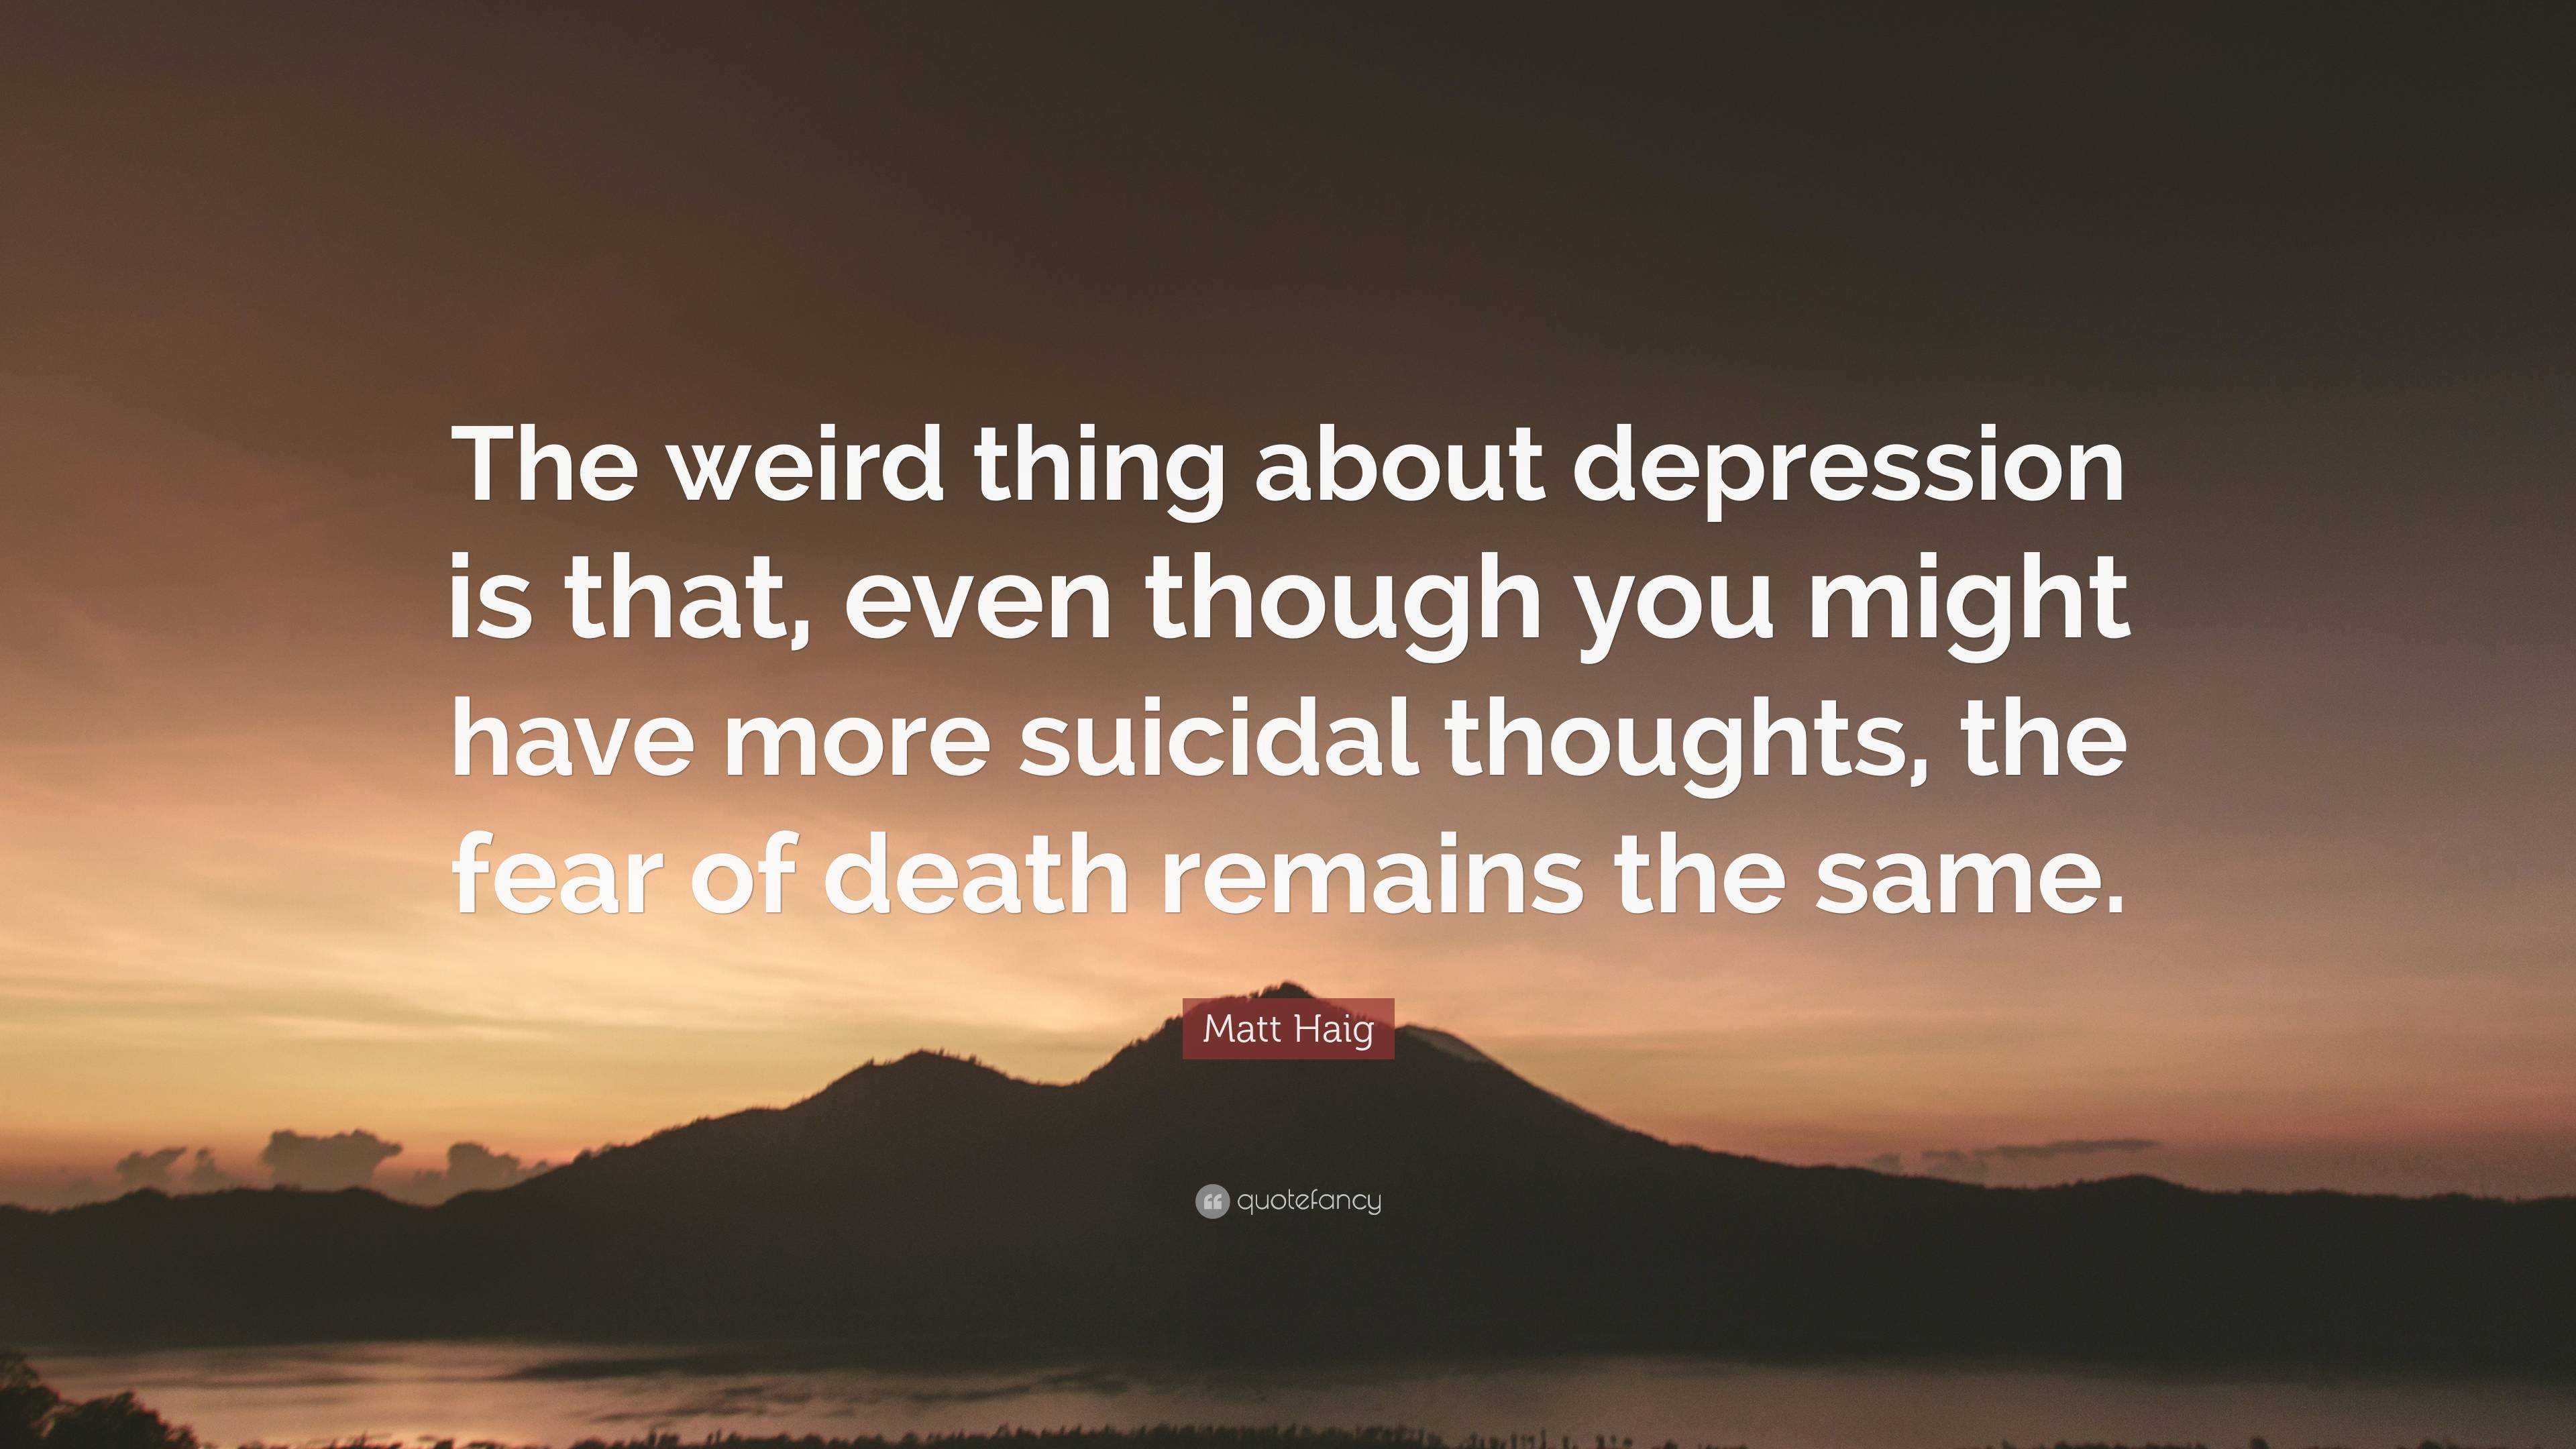 Matt Haig Quote: “The weird thing about depression is that, even though ...